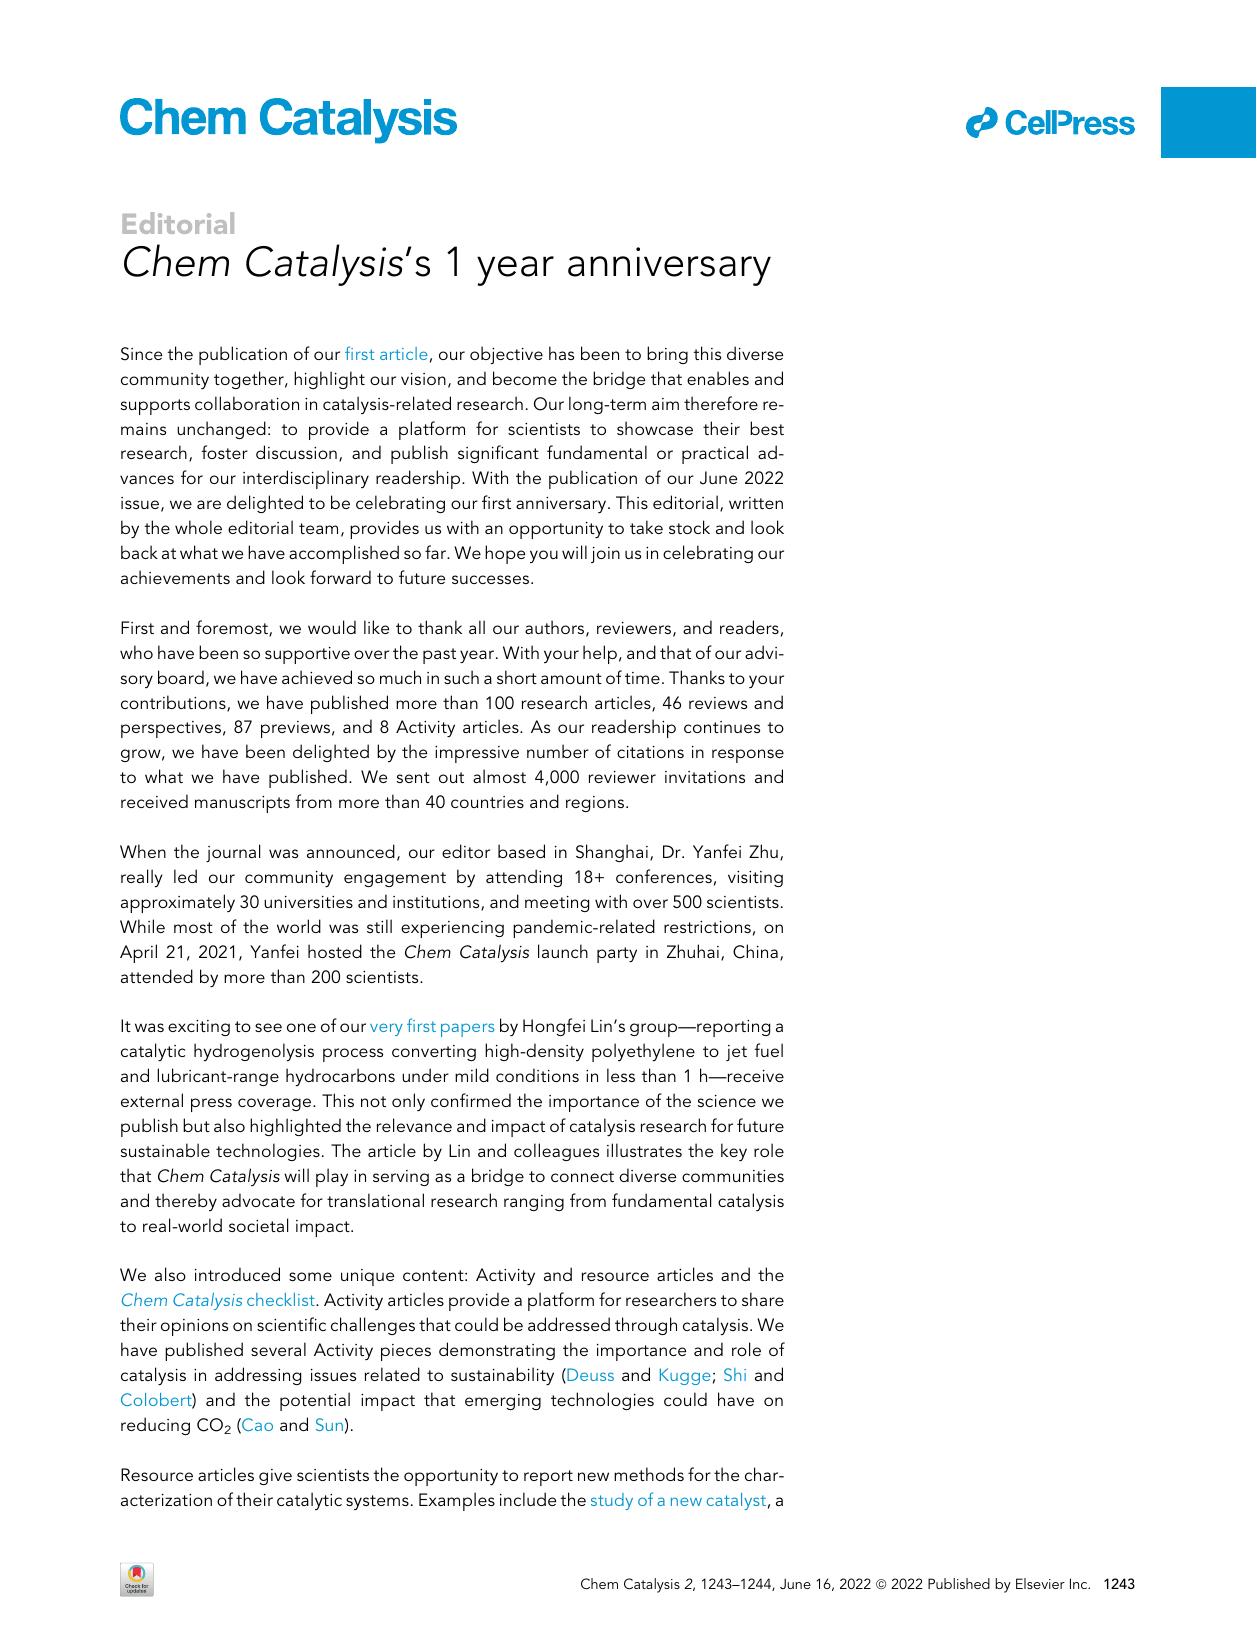 Chem Catalysis's 1 year anniversary by The Chem Catalysis editorial team